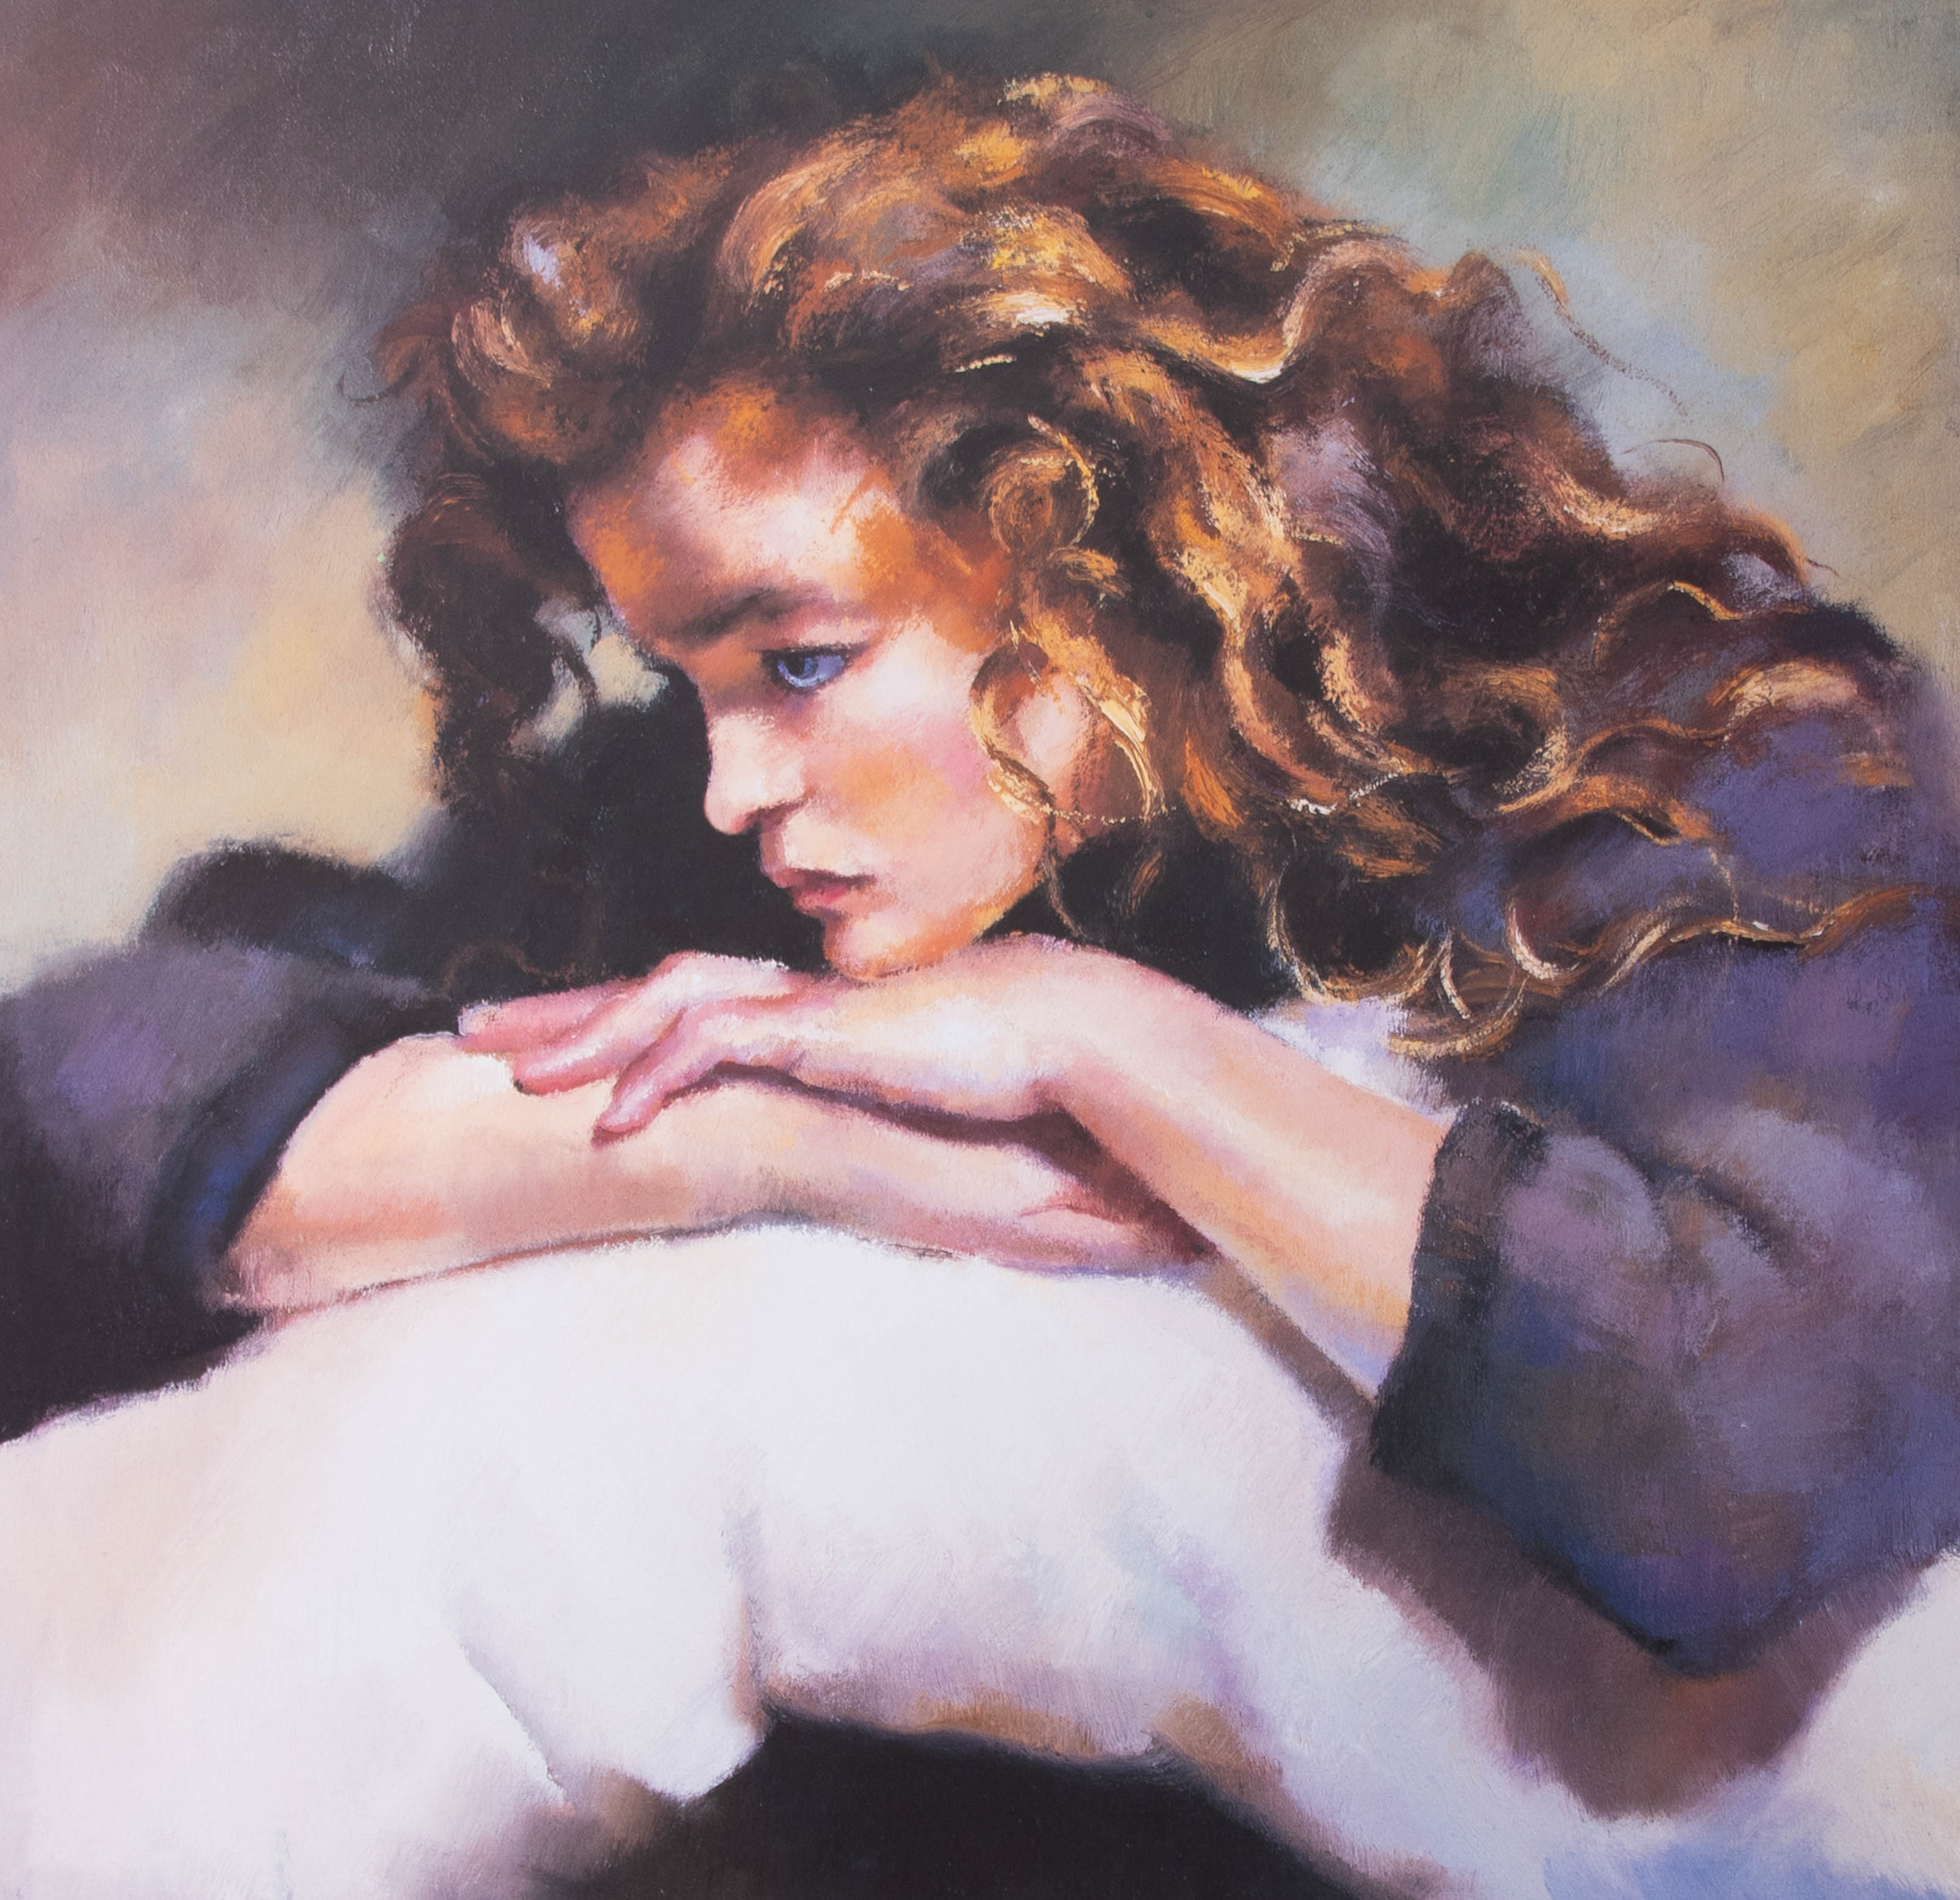 Robert Lenkiewicz, 'Study of Lisa', signed edition print 14/475, 37cm x 37cm, unframed, with - Image 2 of 2